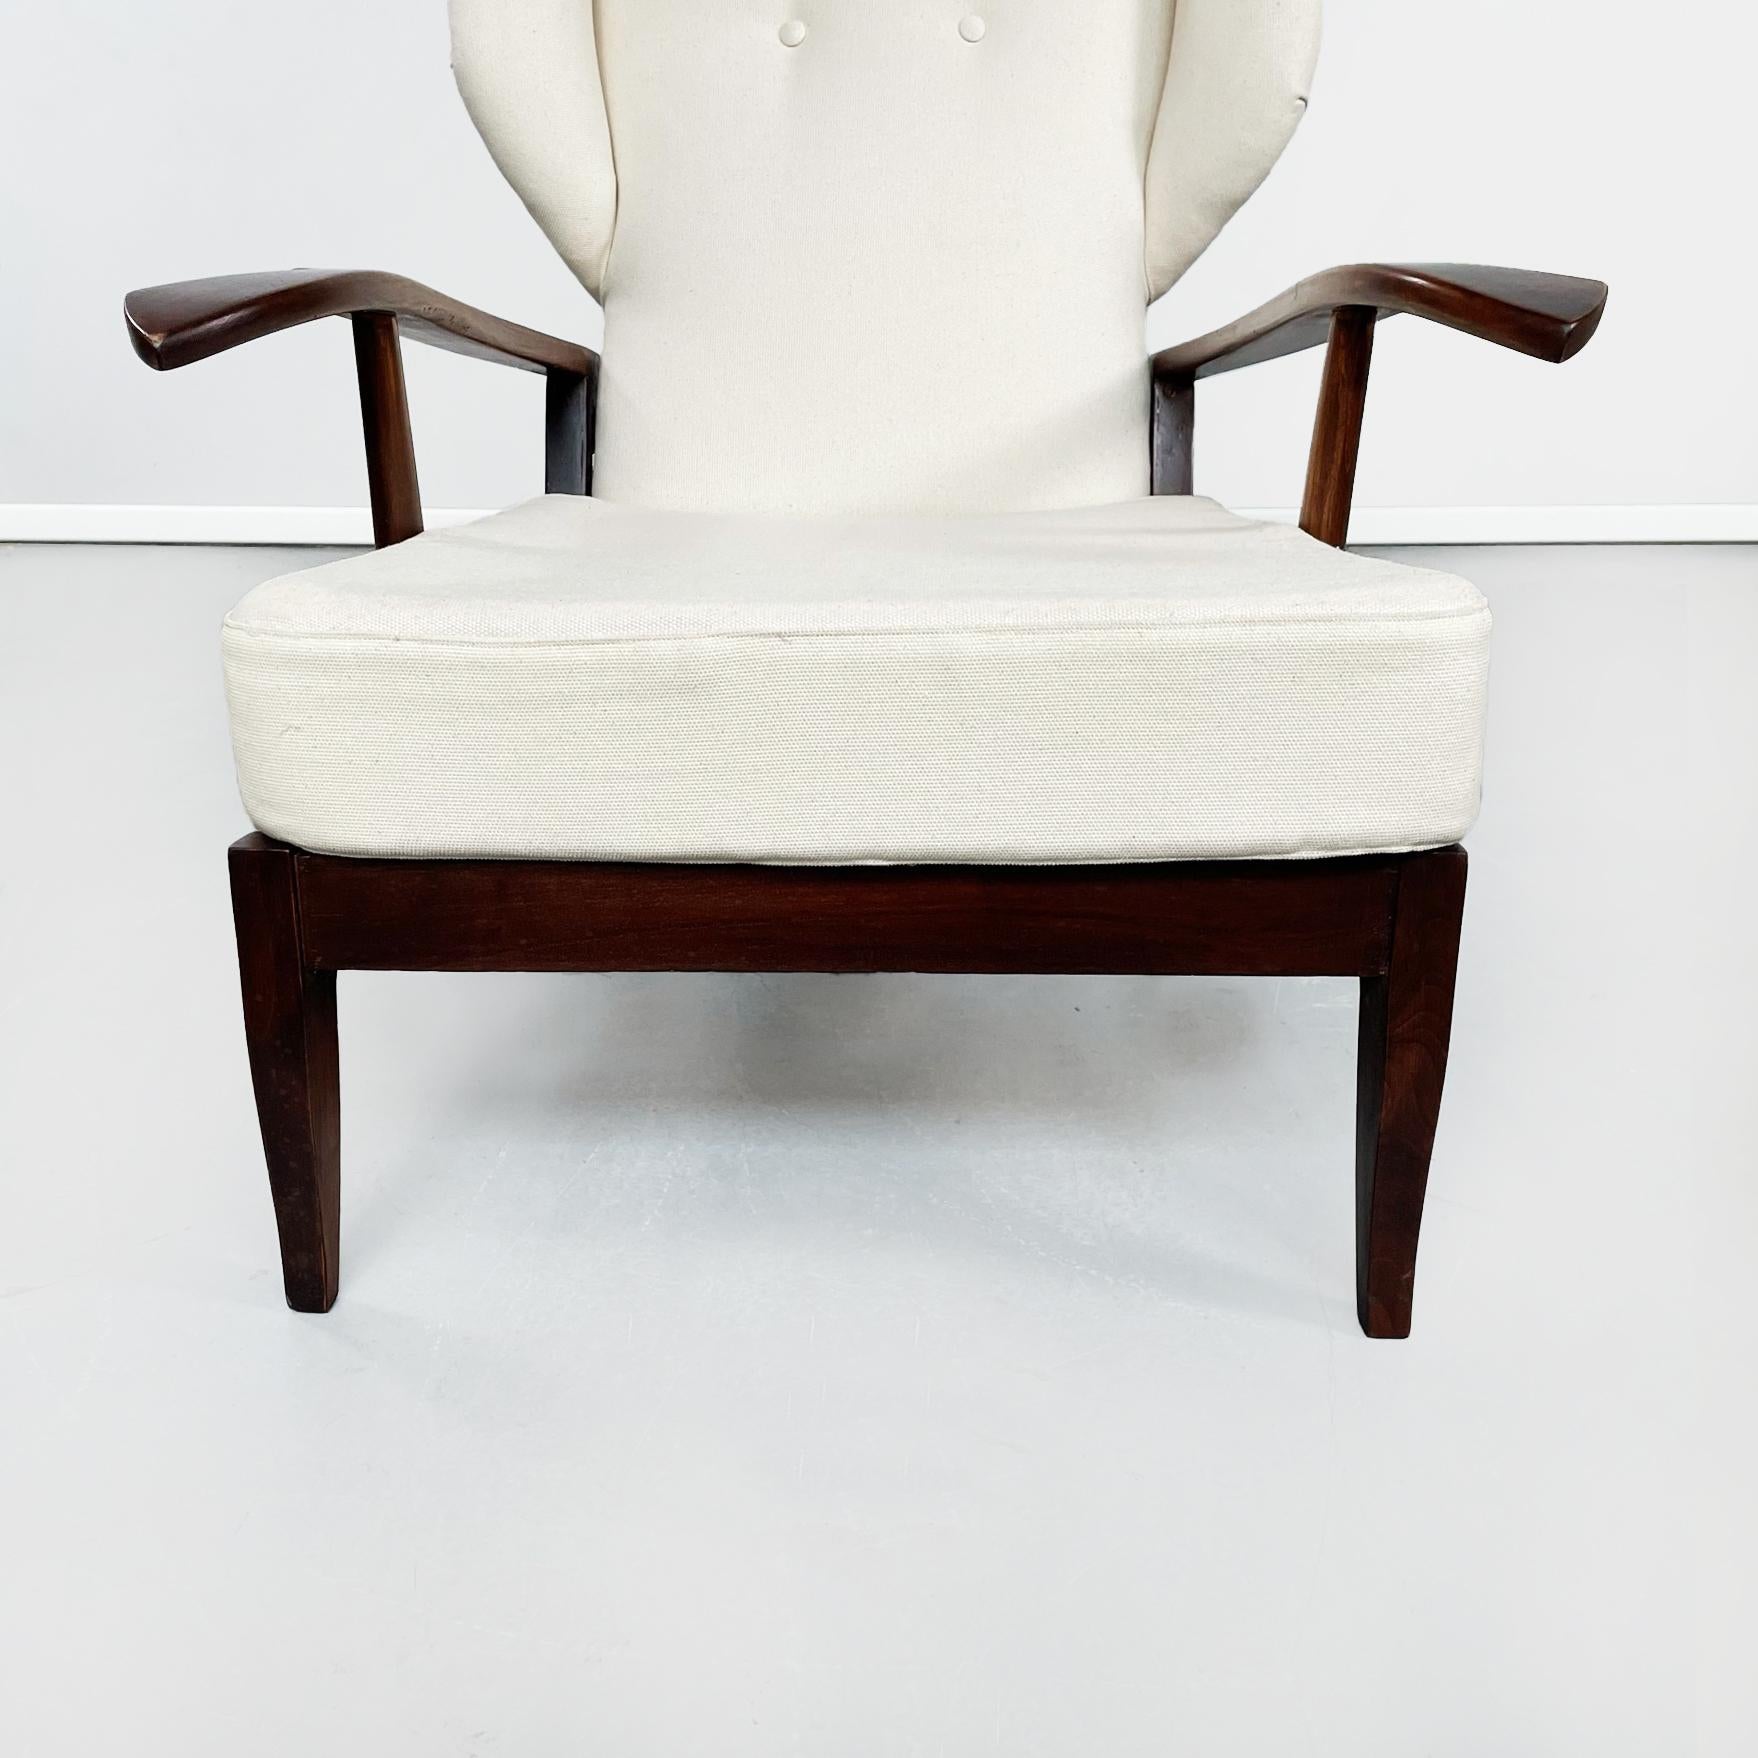 Italian Mid-Century White Fabric and Wooden Armchair by Paolo Buffa, 1950s For Sale 1